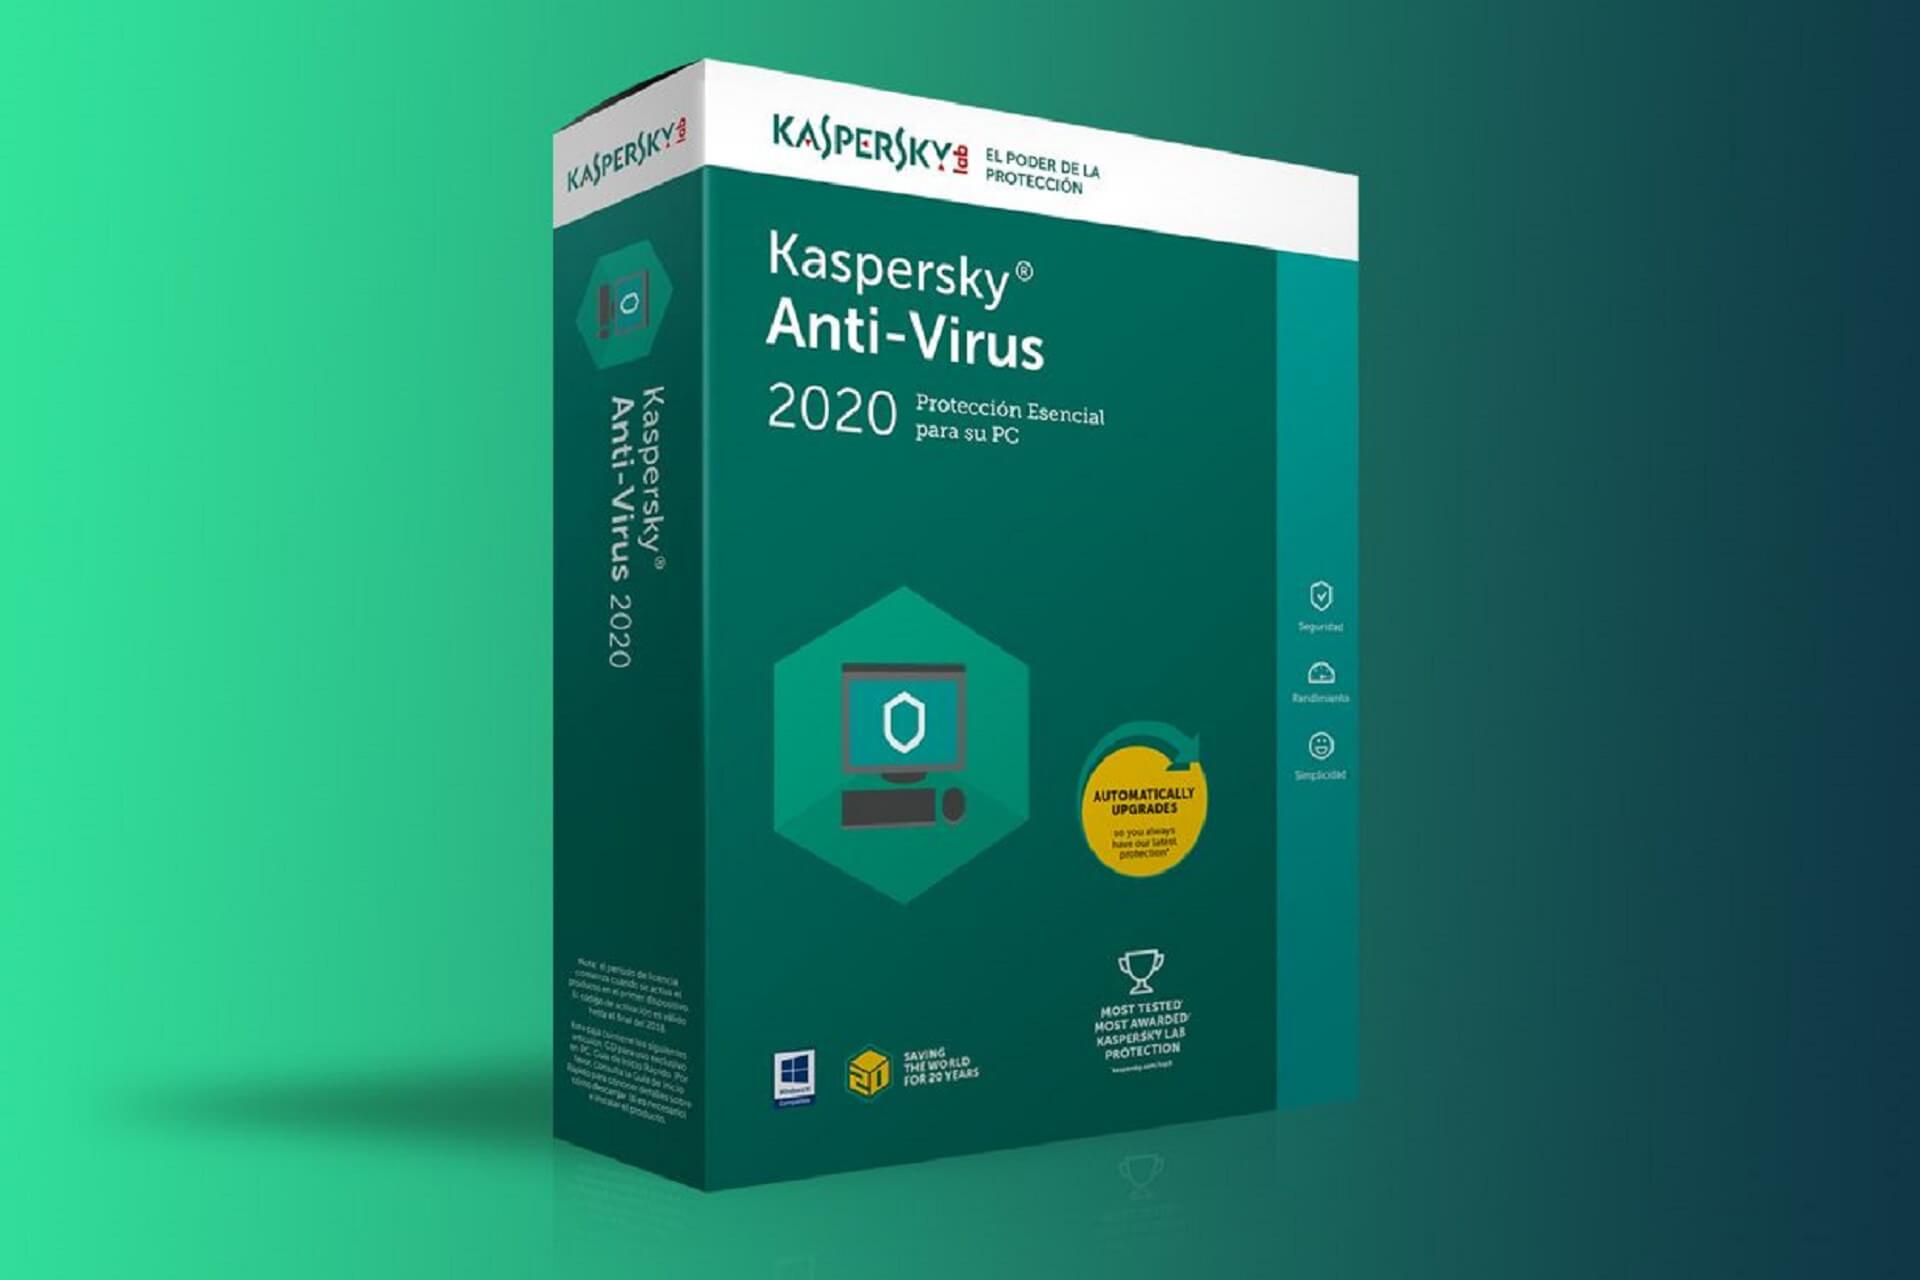 kaspersky database are out of date